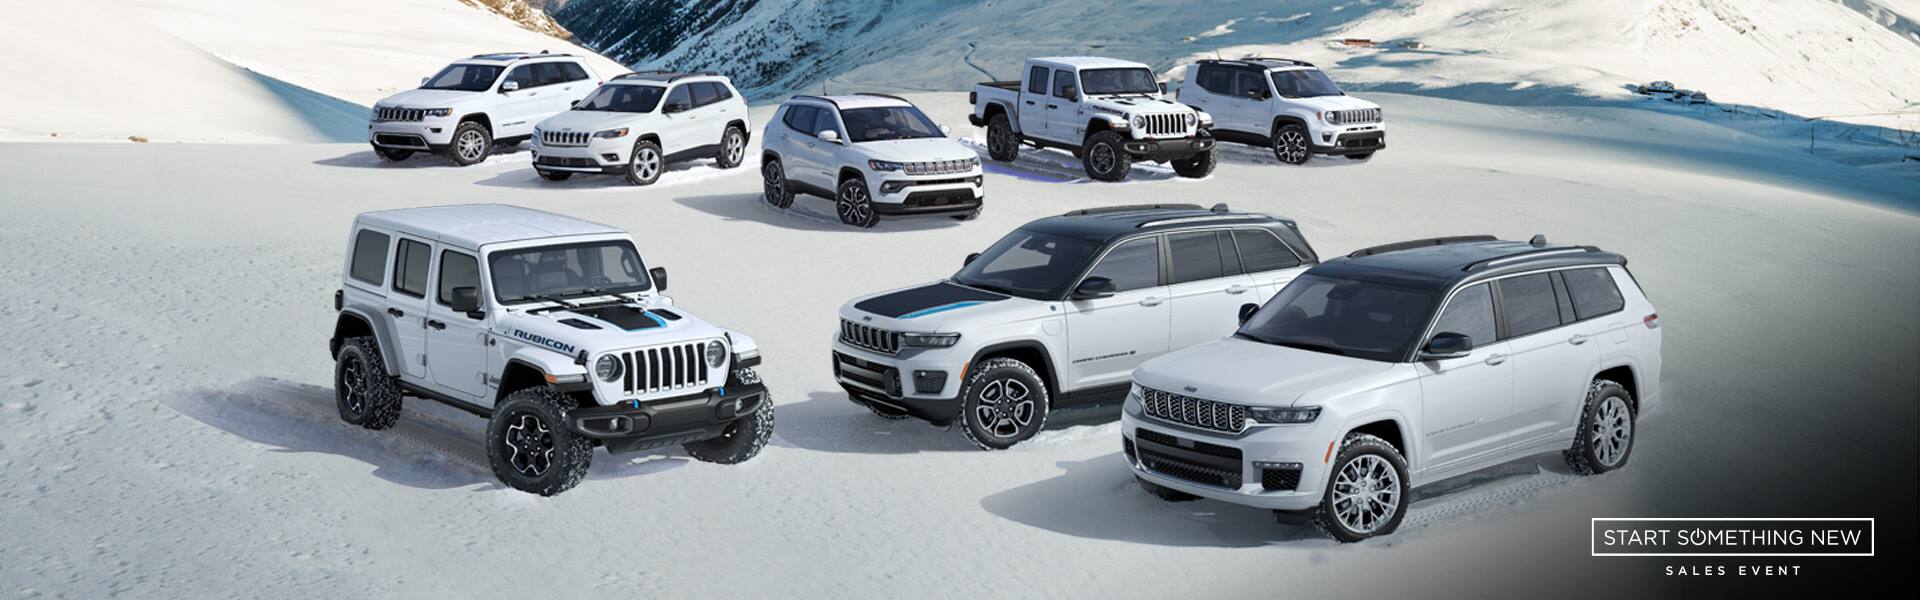 Start something new sales event. A lineup of eight 2021 Jeep Brand vehicles on a snowy mountain.